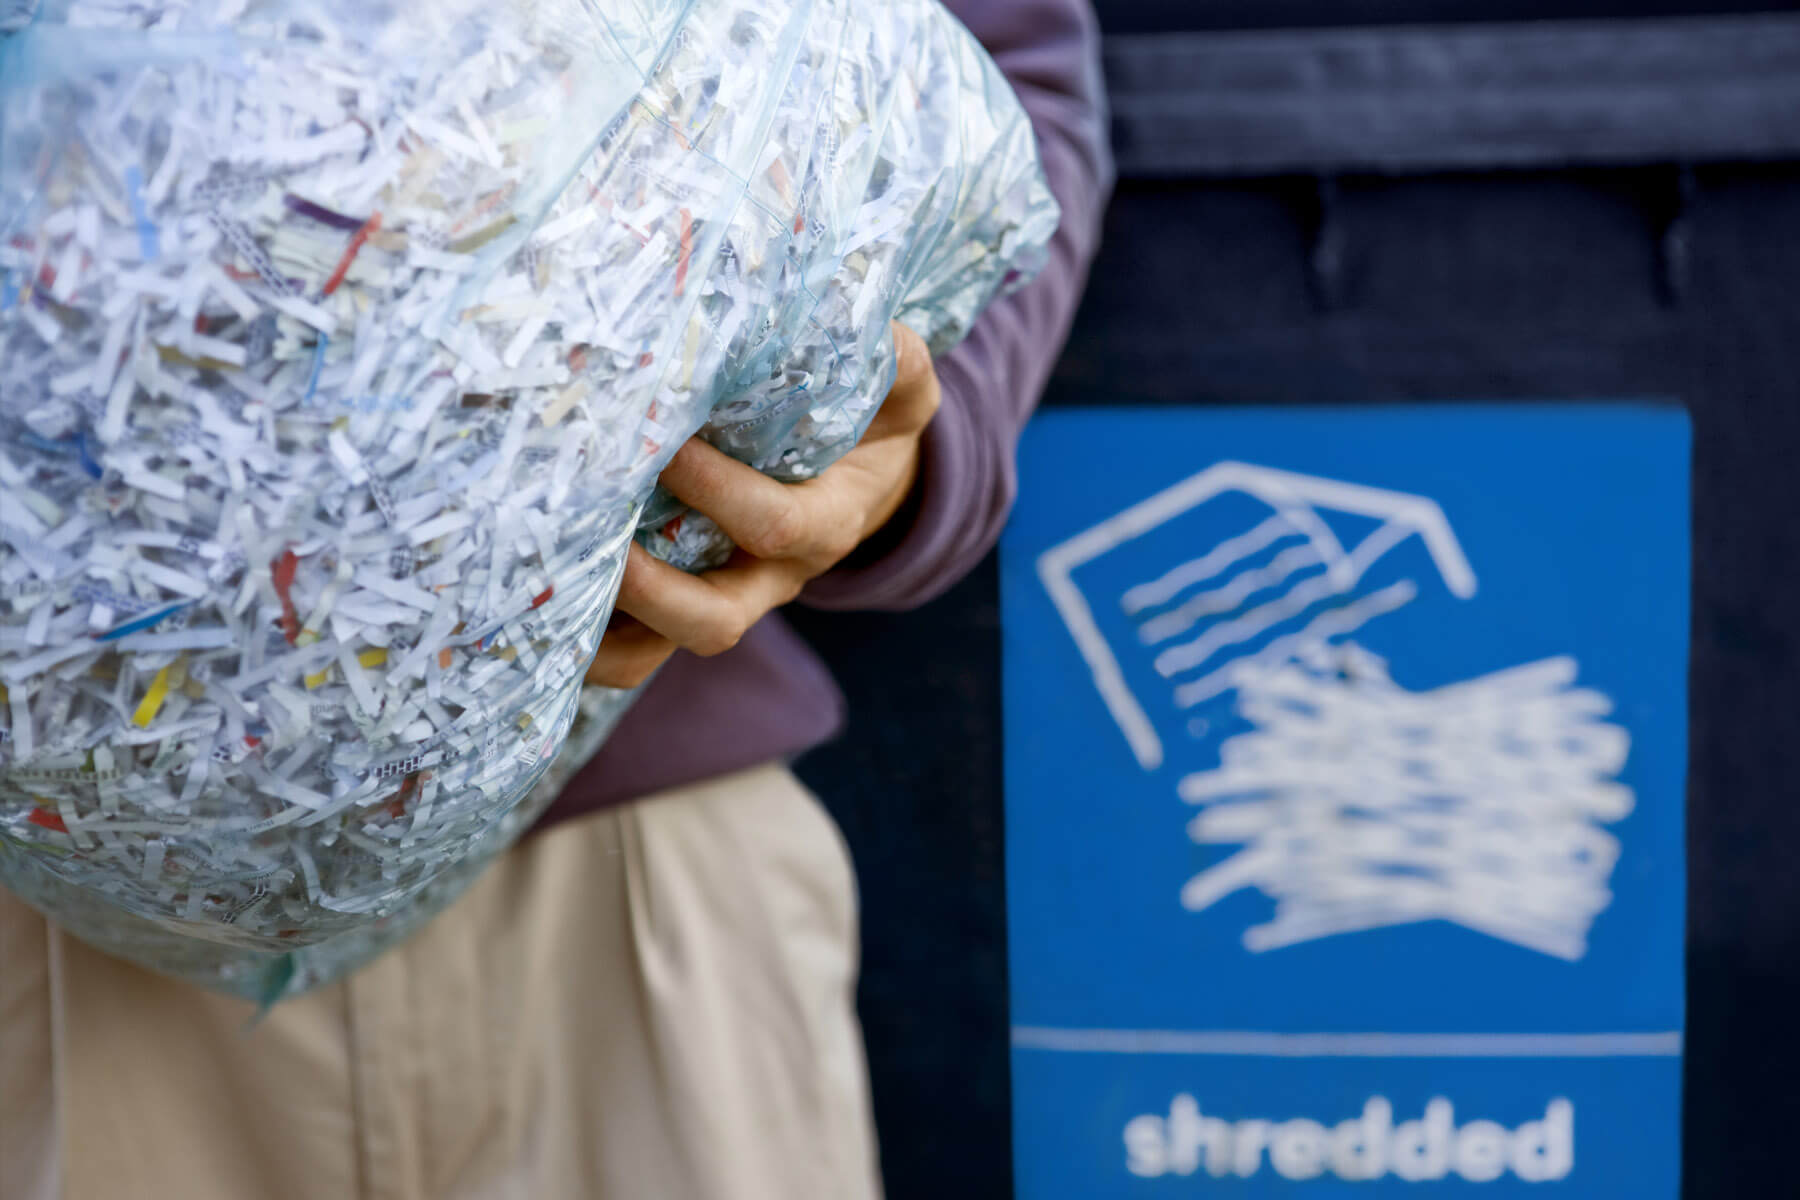 Protect Your Privacy with a Free Shredding Event in Westwood